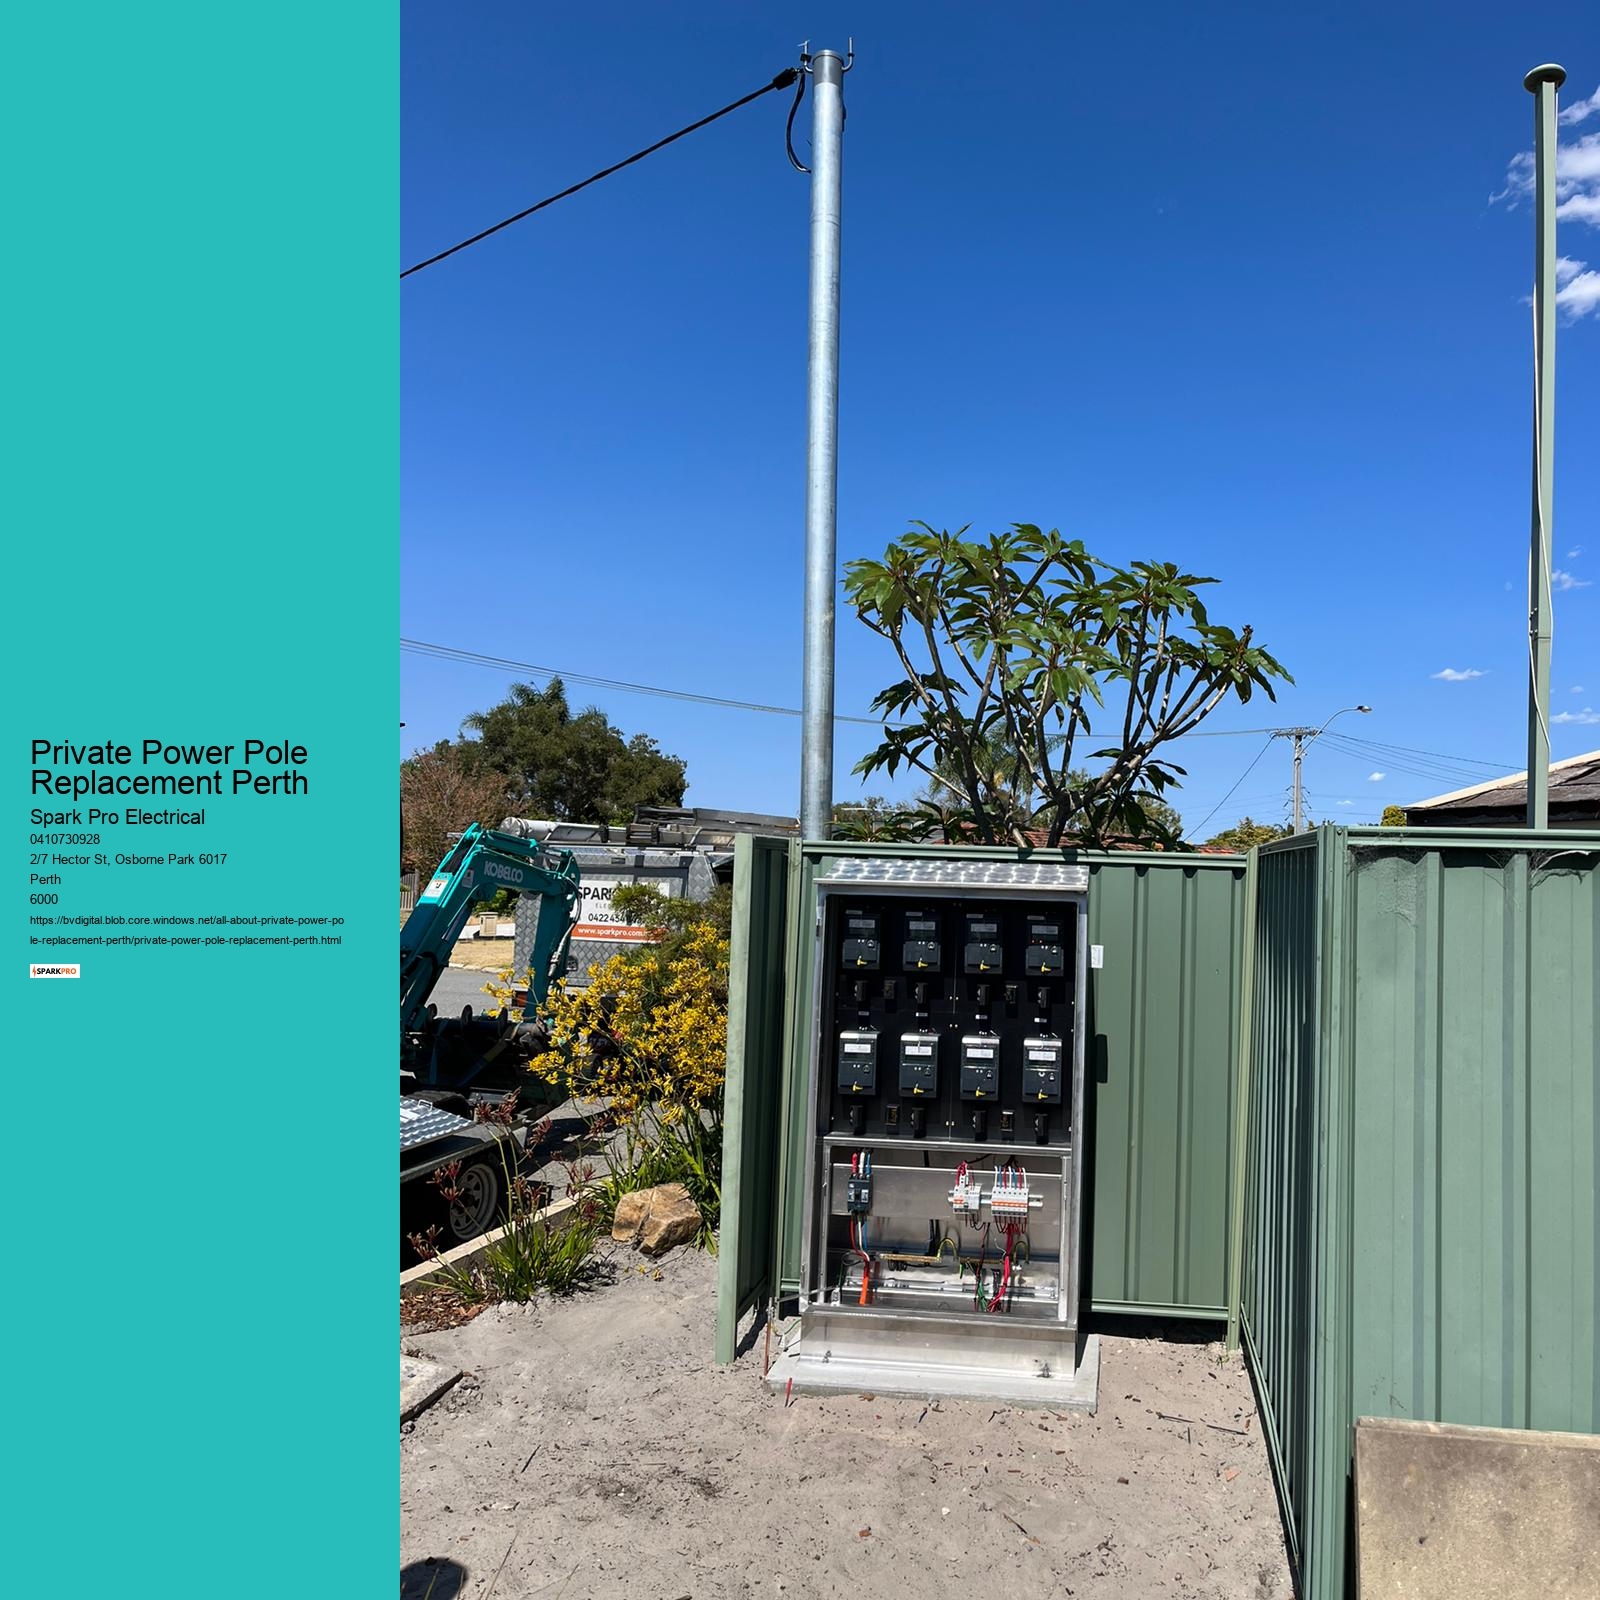 Efficient Power Pole Installations for Perth